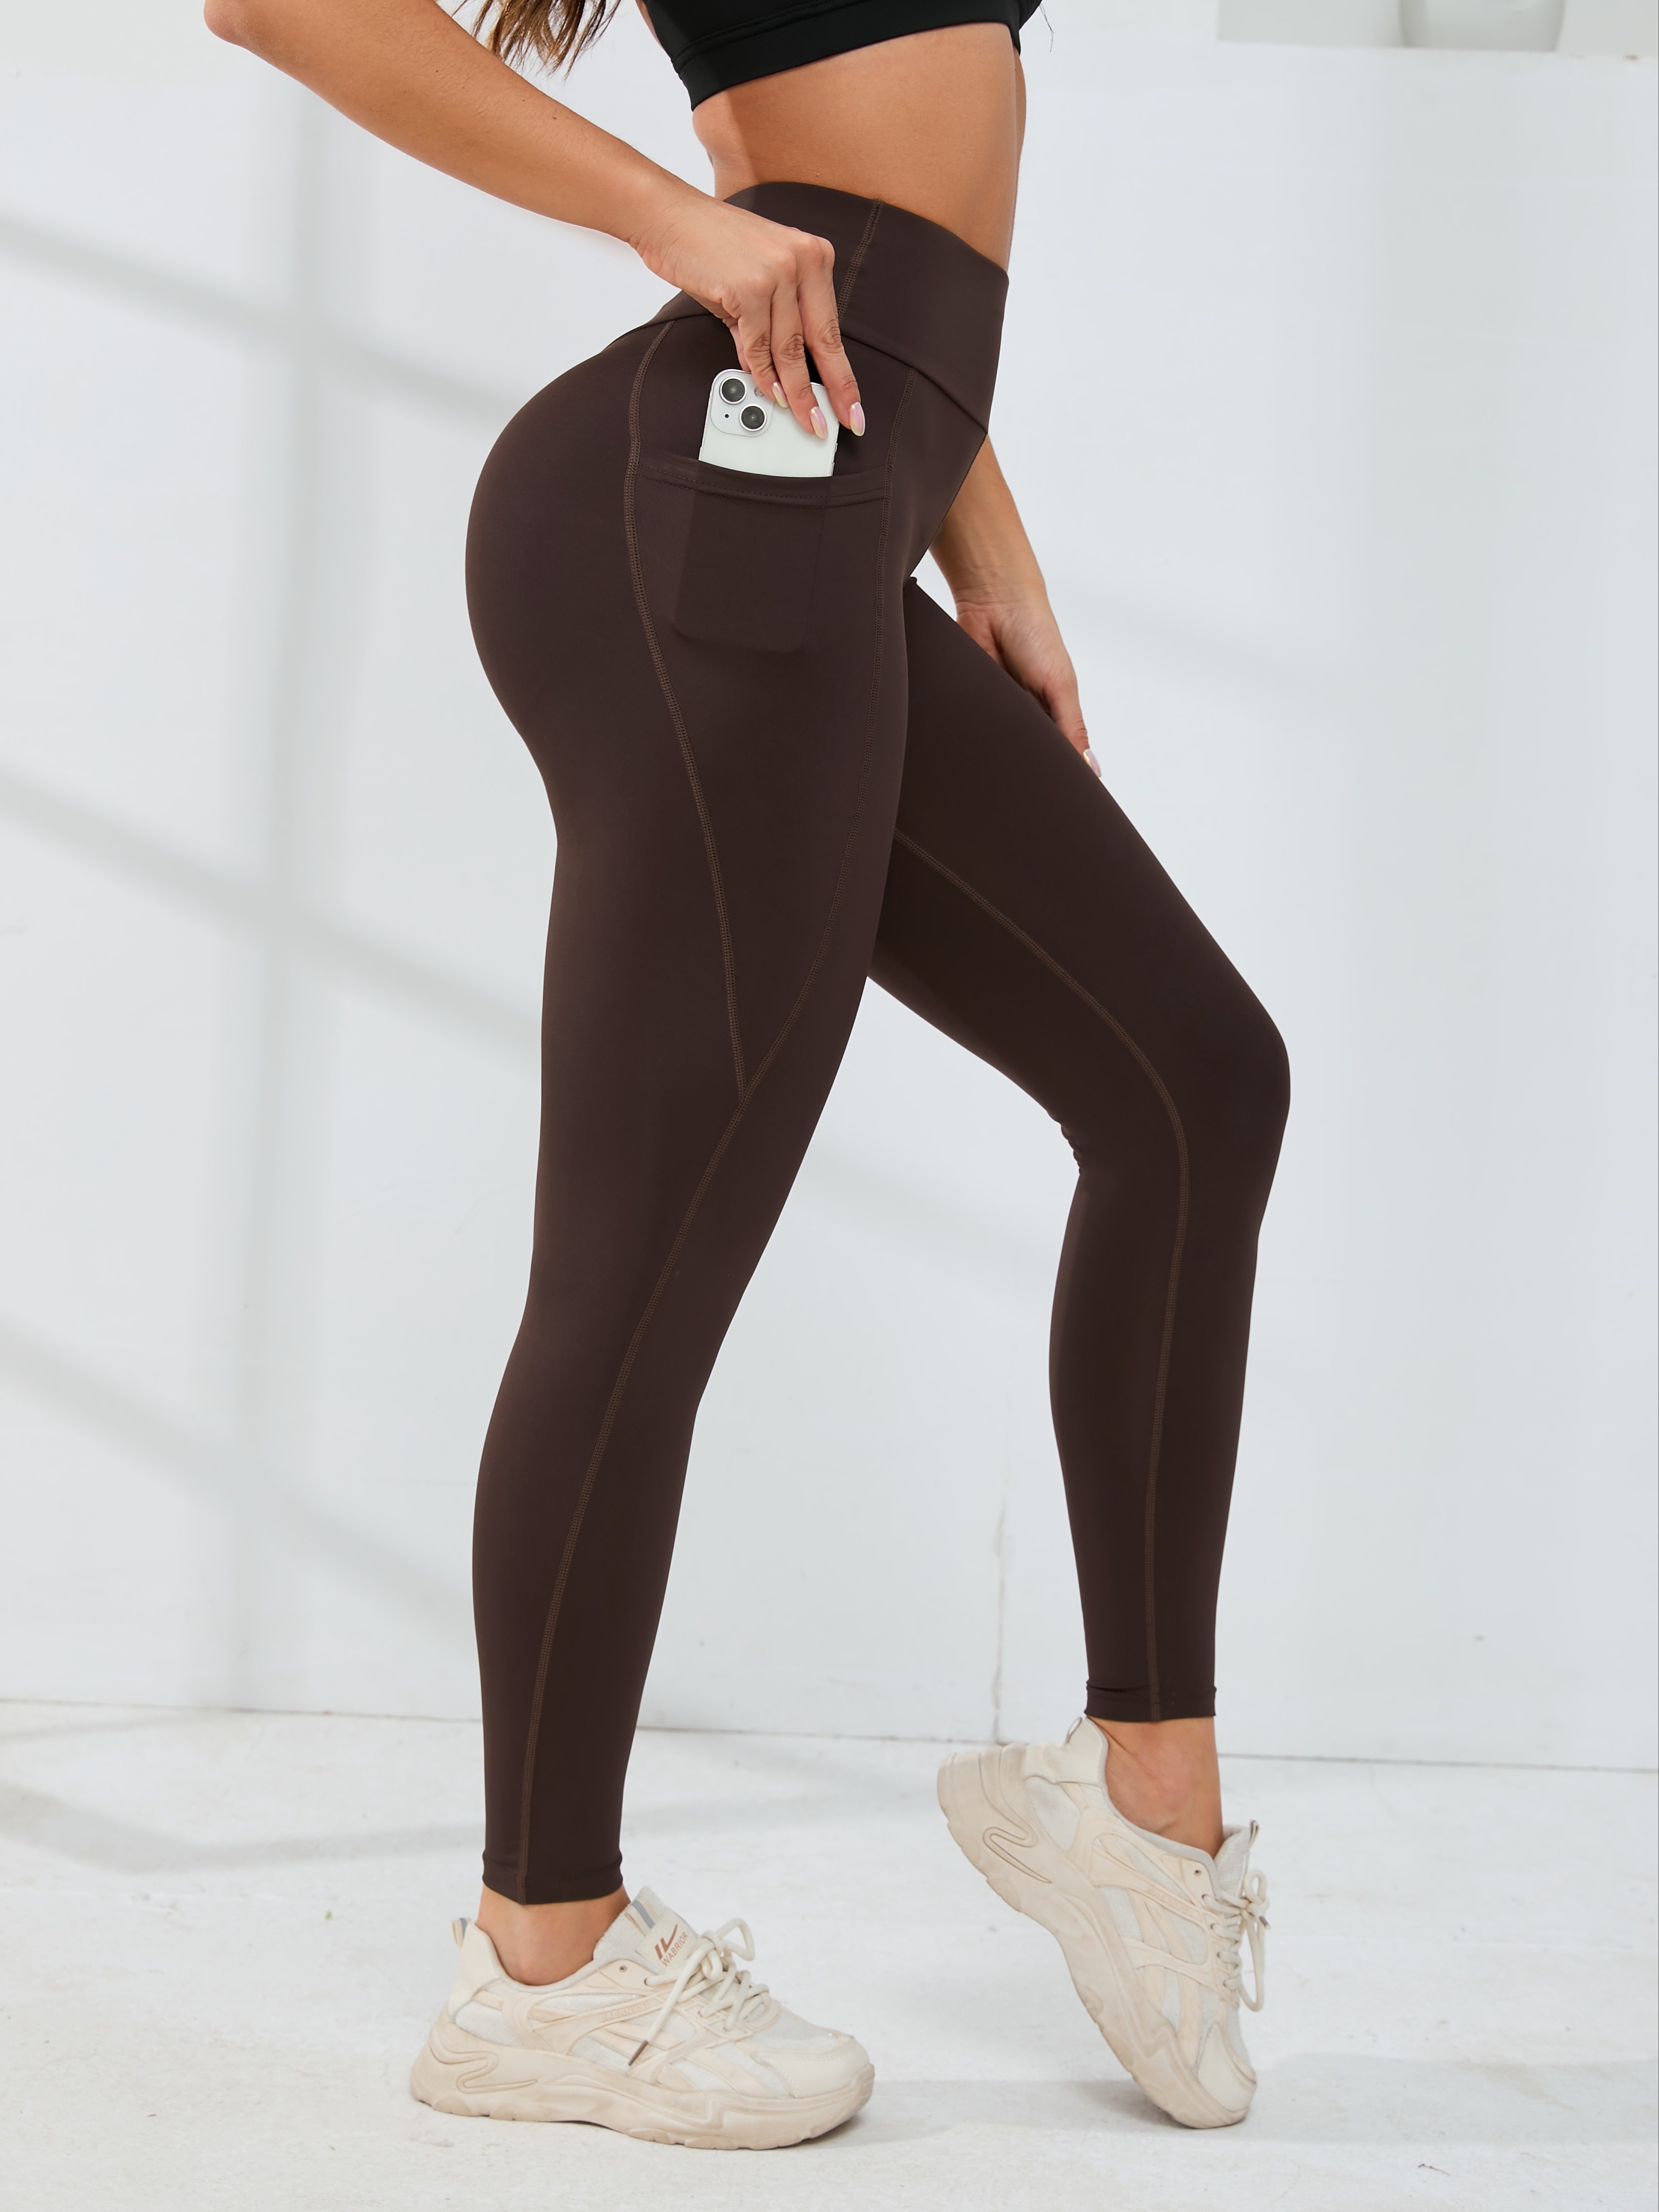 Perfect yoga tights in Chocolate Brown - Harvest Moon Stockholm